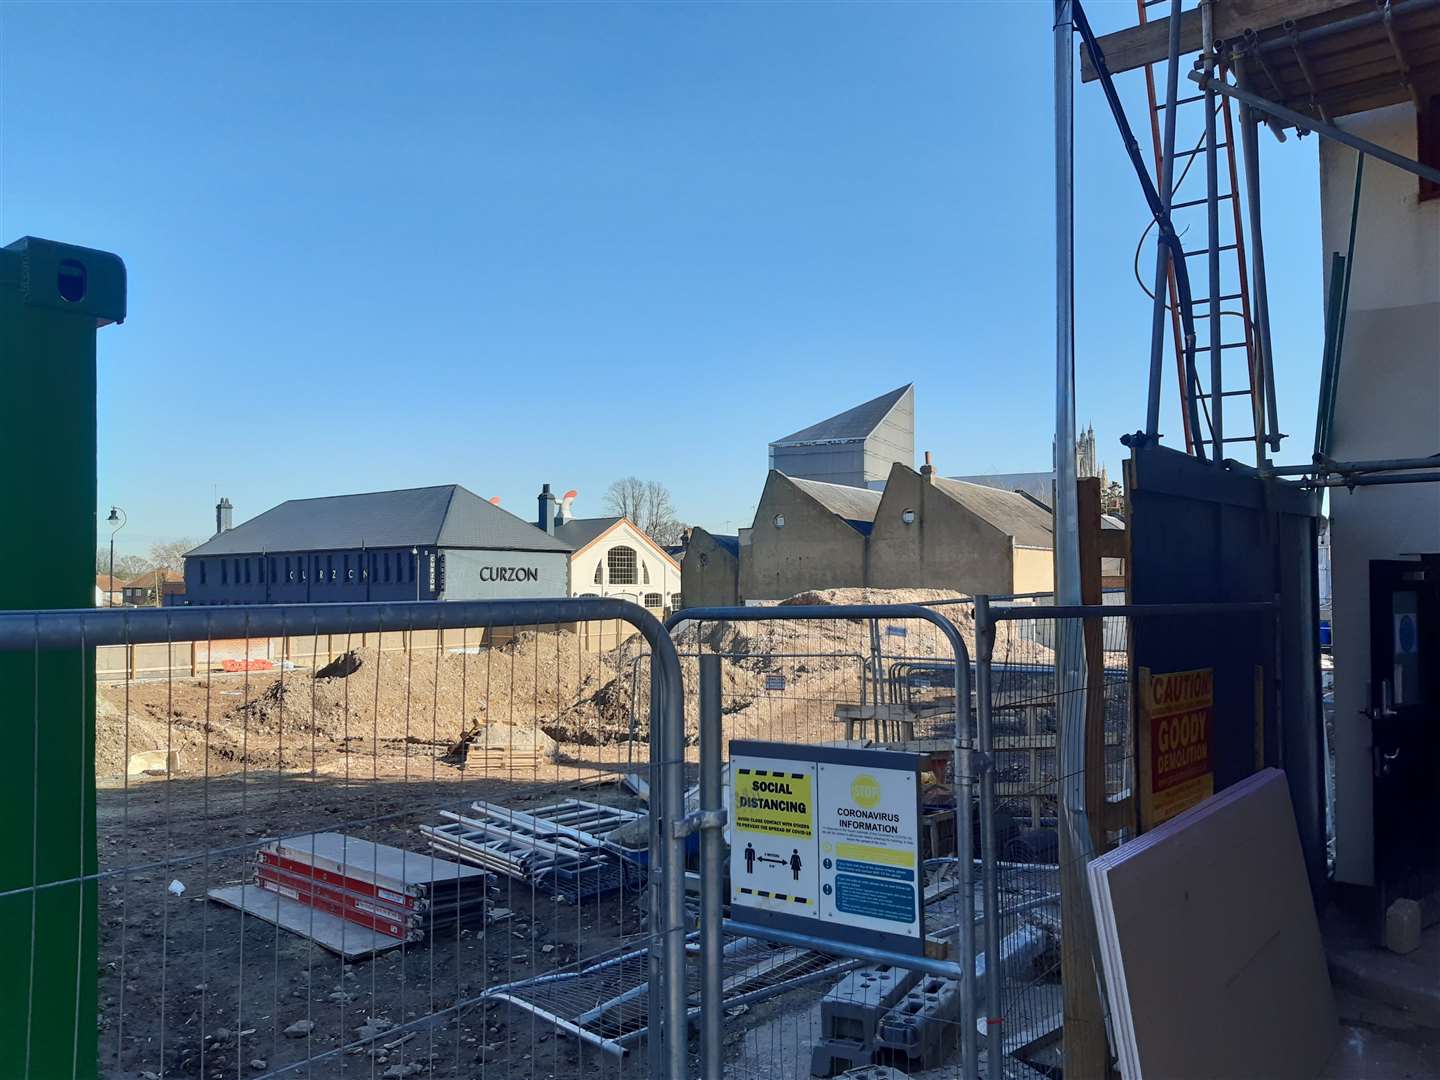 Work on the approved student flats behind the former showroom is already under way